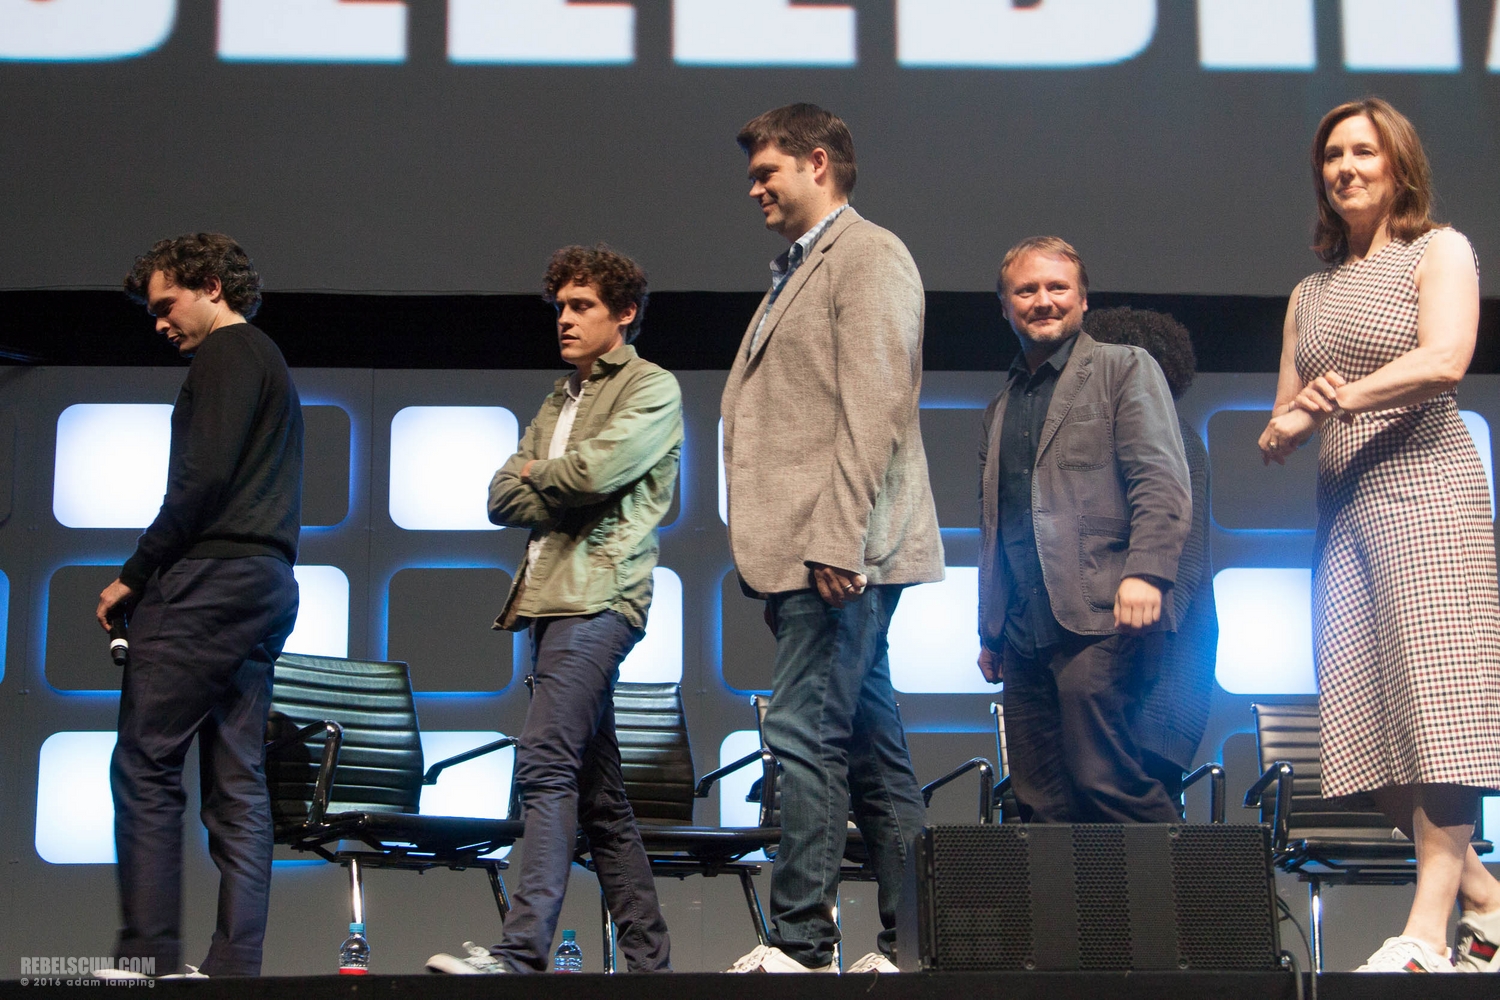 star-wars-celebration-2016-future-filmmakers-and-closing-ceremony-049.jpg